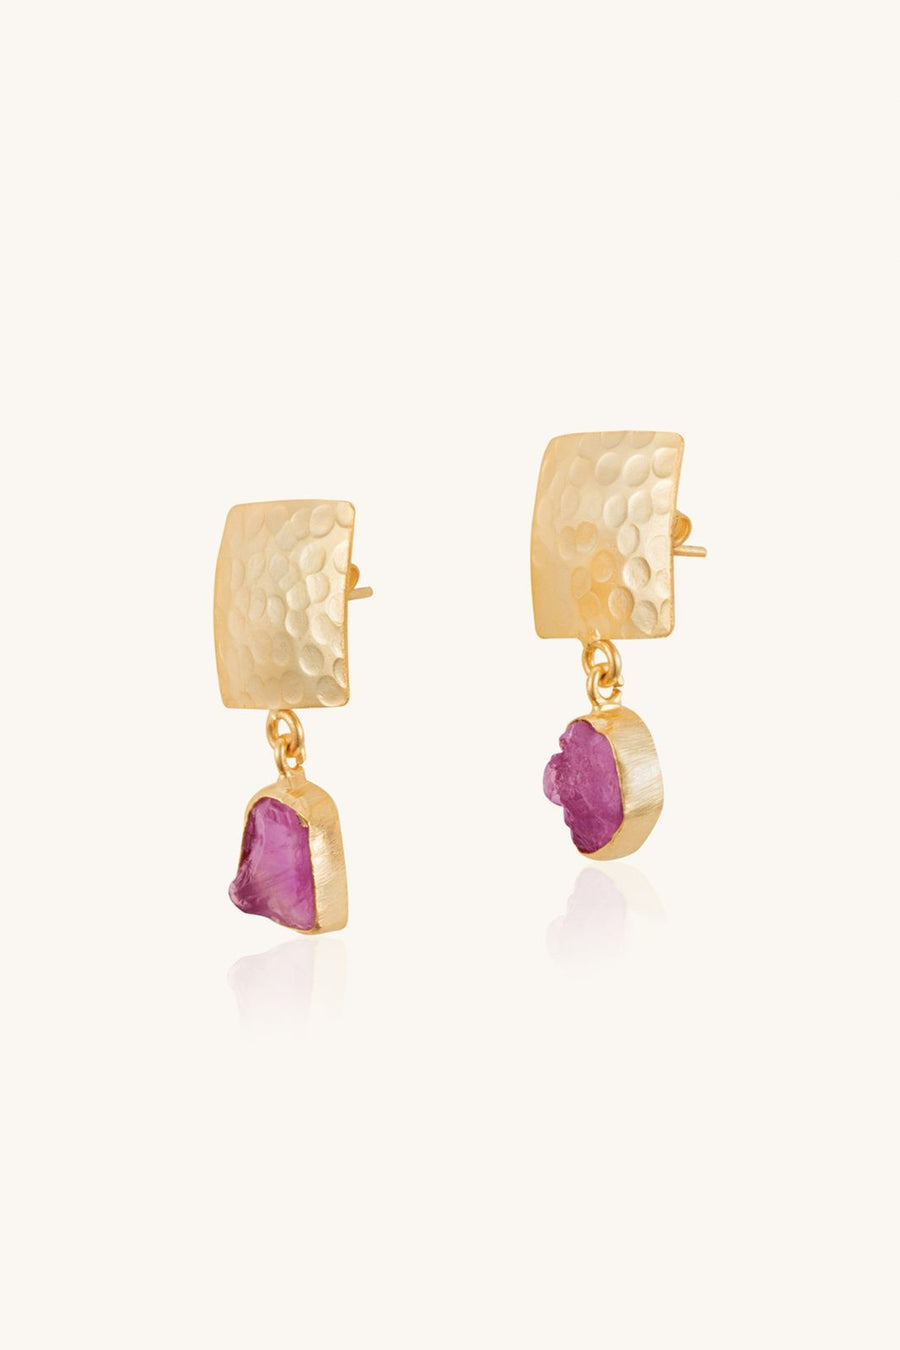 Gold, Mulberry, Earrings, Jewelry, Fashion, Accessories, Style